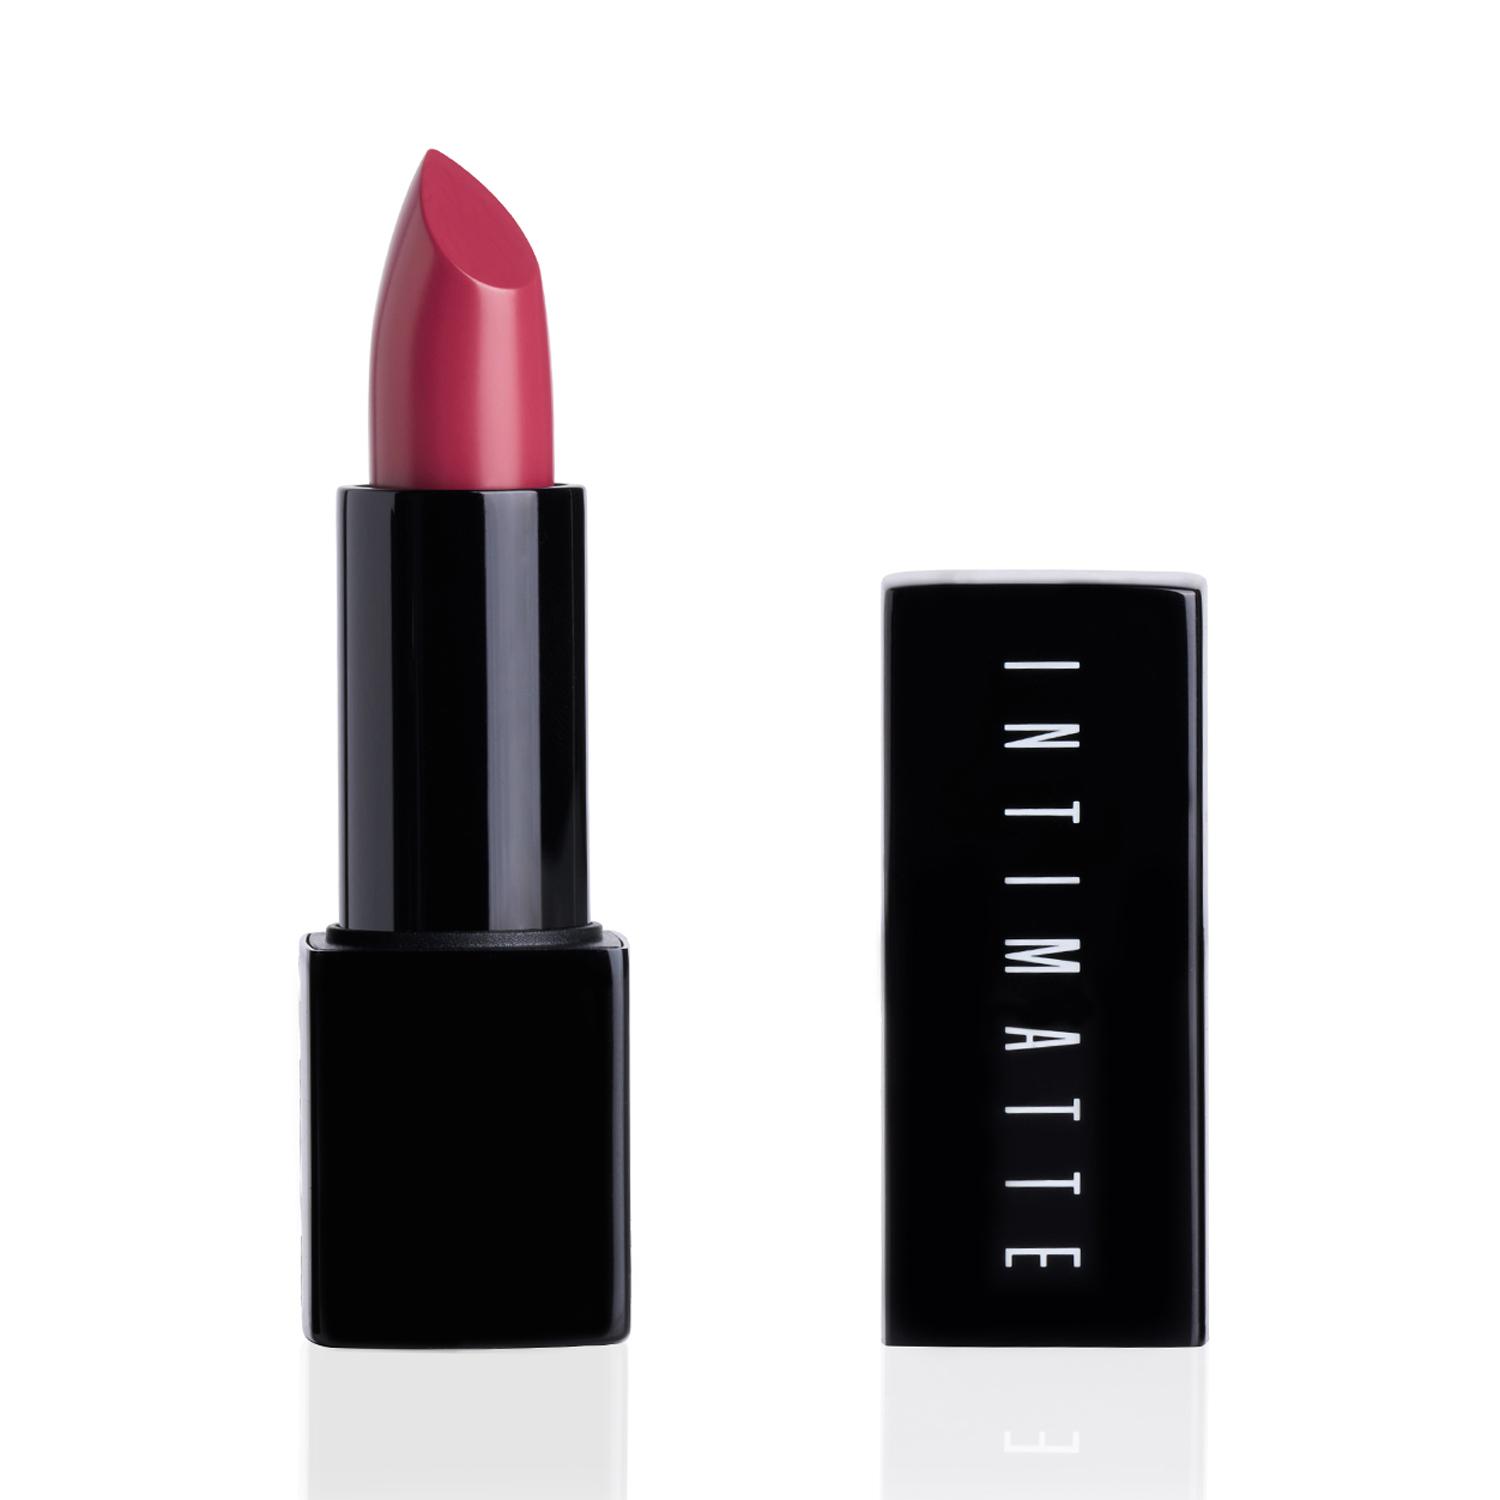 PAC Intimatte Lipstick - The Only Exception (4g)